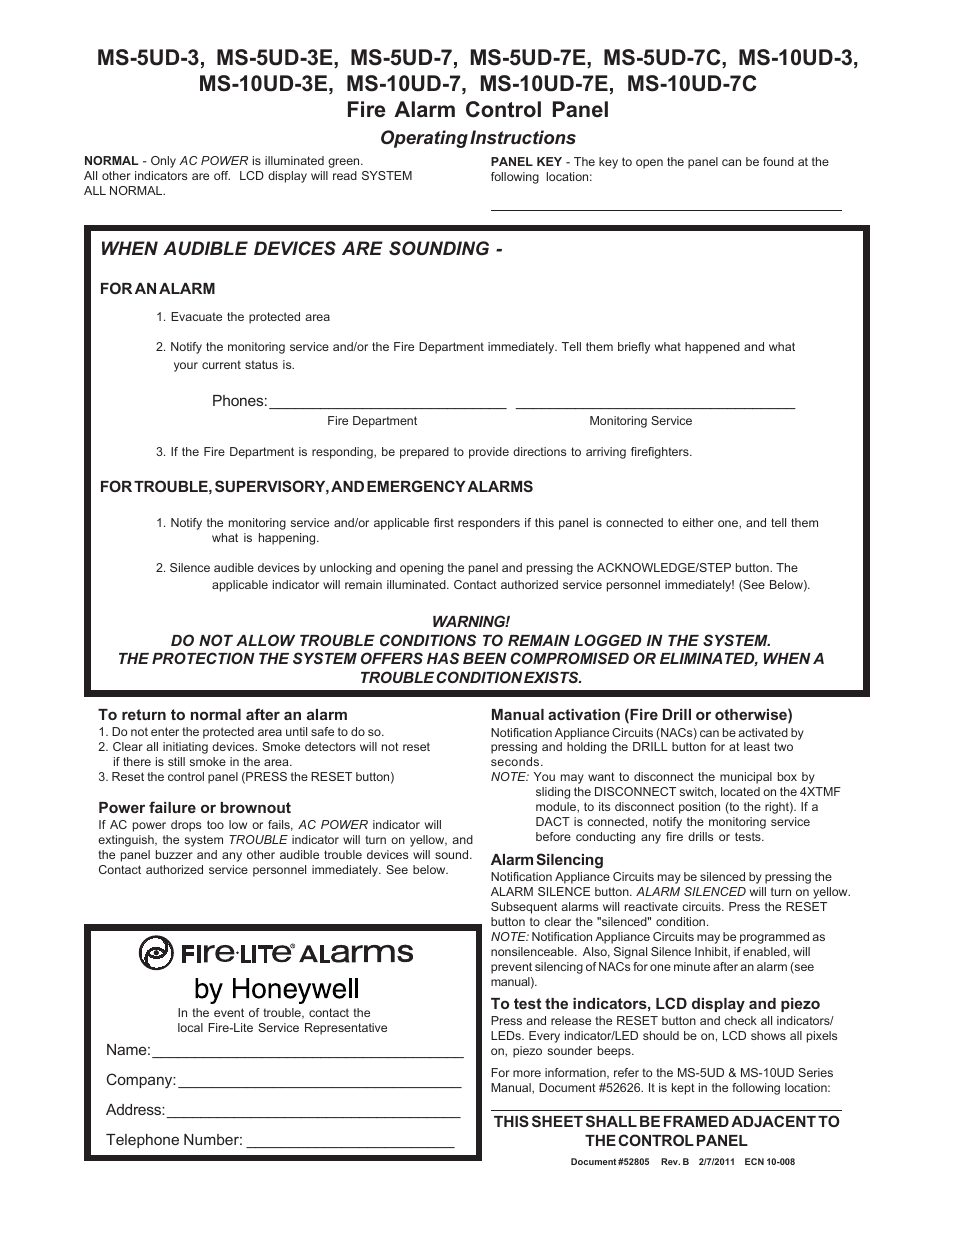 Honeywell MS-5UD User Manual | 1 page